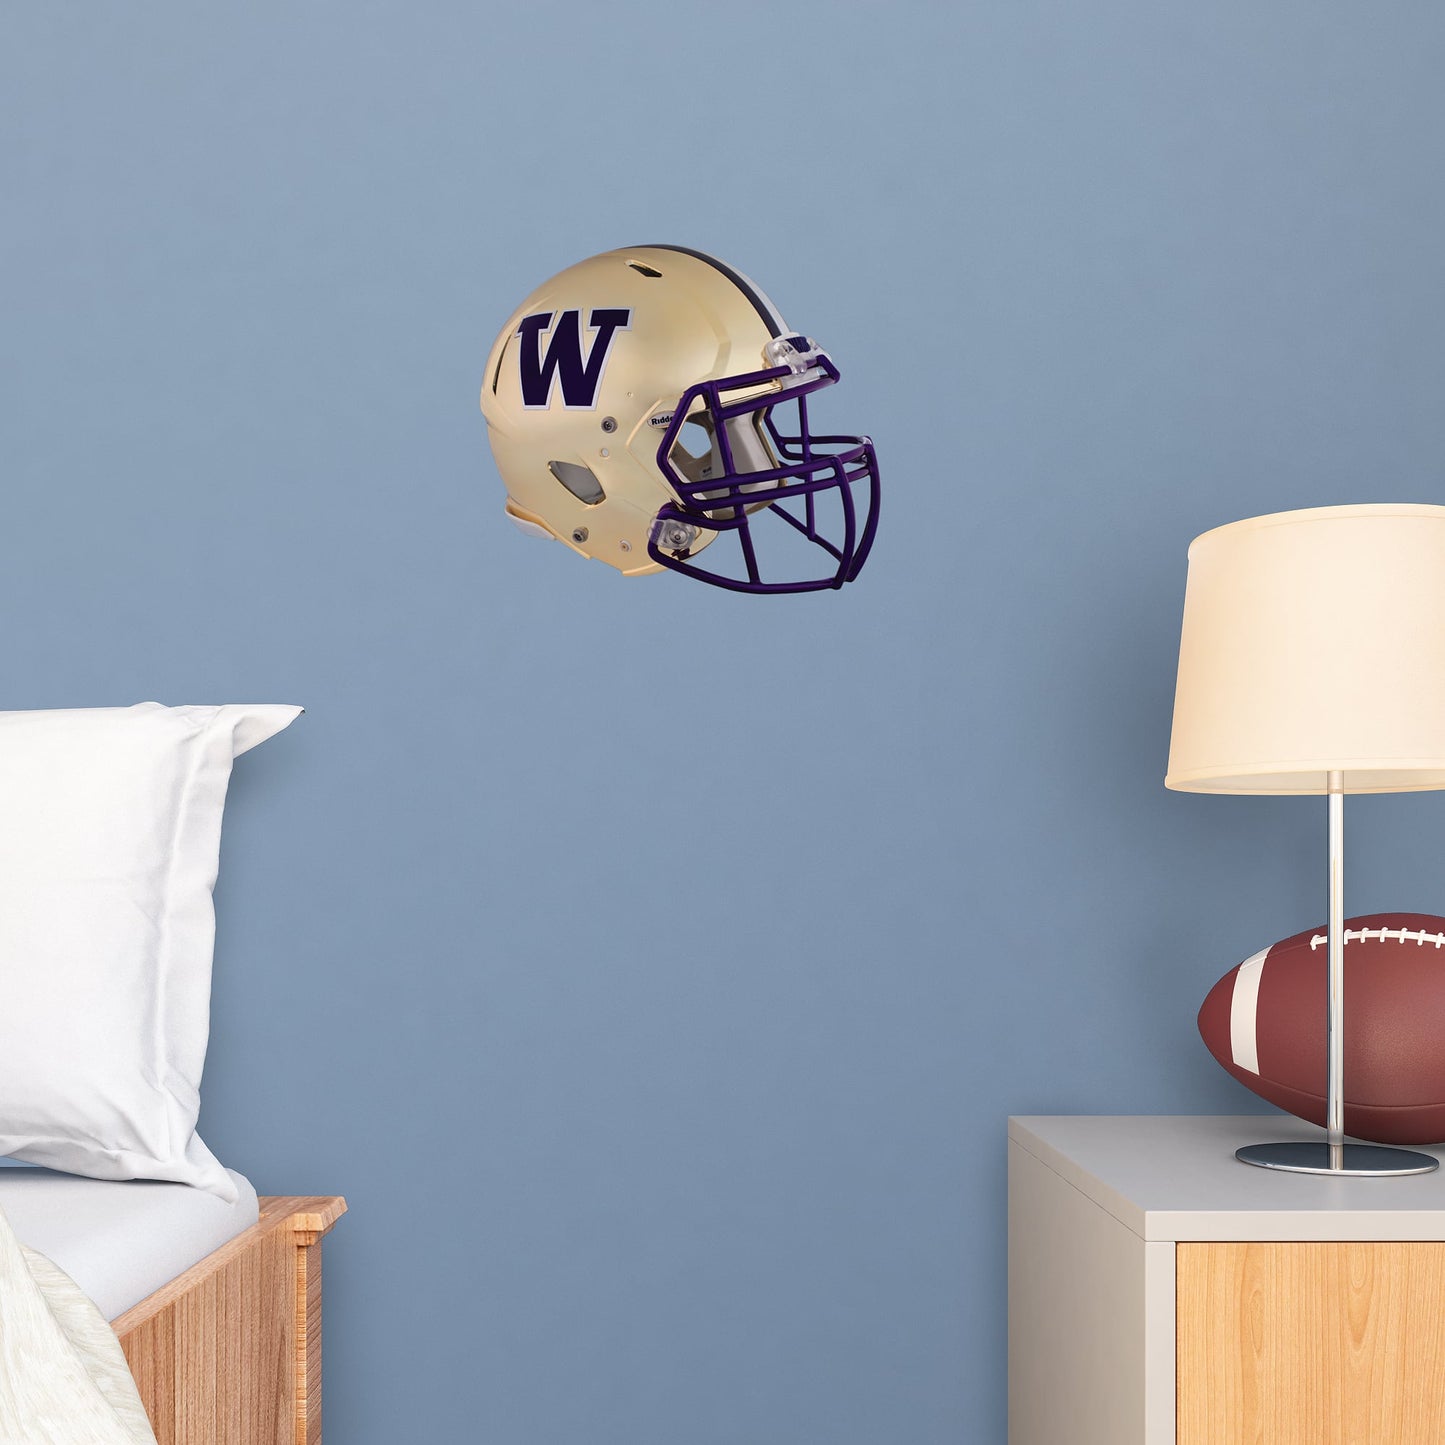 Washington Huskies: Helmet - Officially Licensed Removable Wall Decal